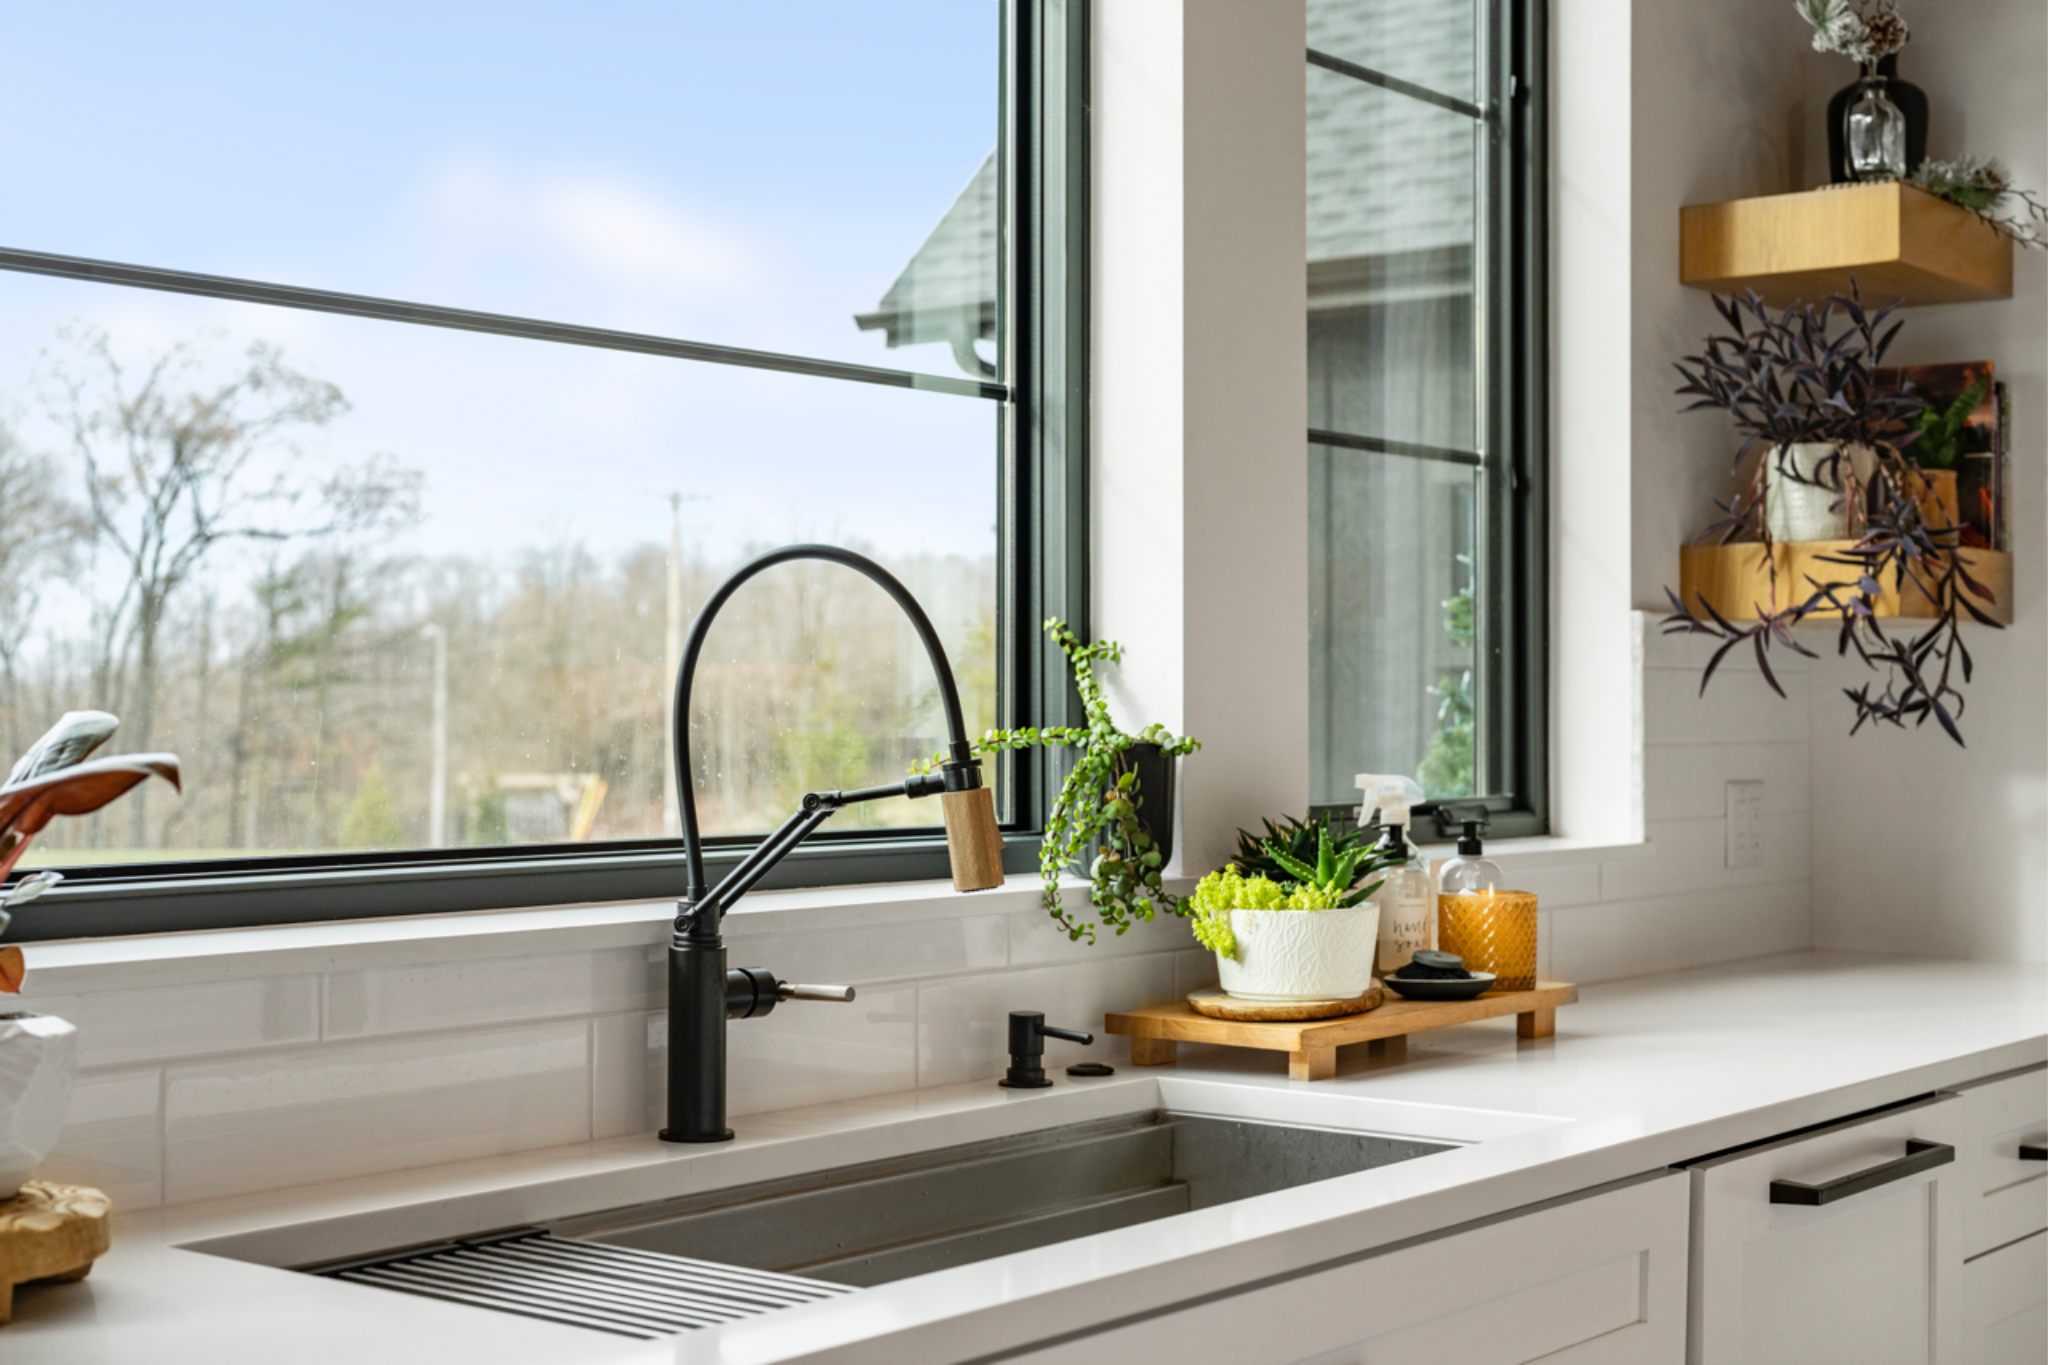 Bright kitchen sink area with quartz countertops, demonstrating one of the best countertop materials for durability and style.